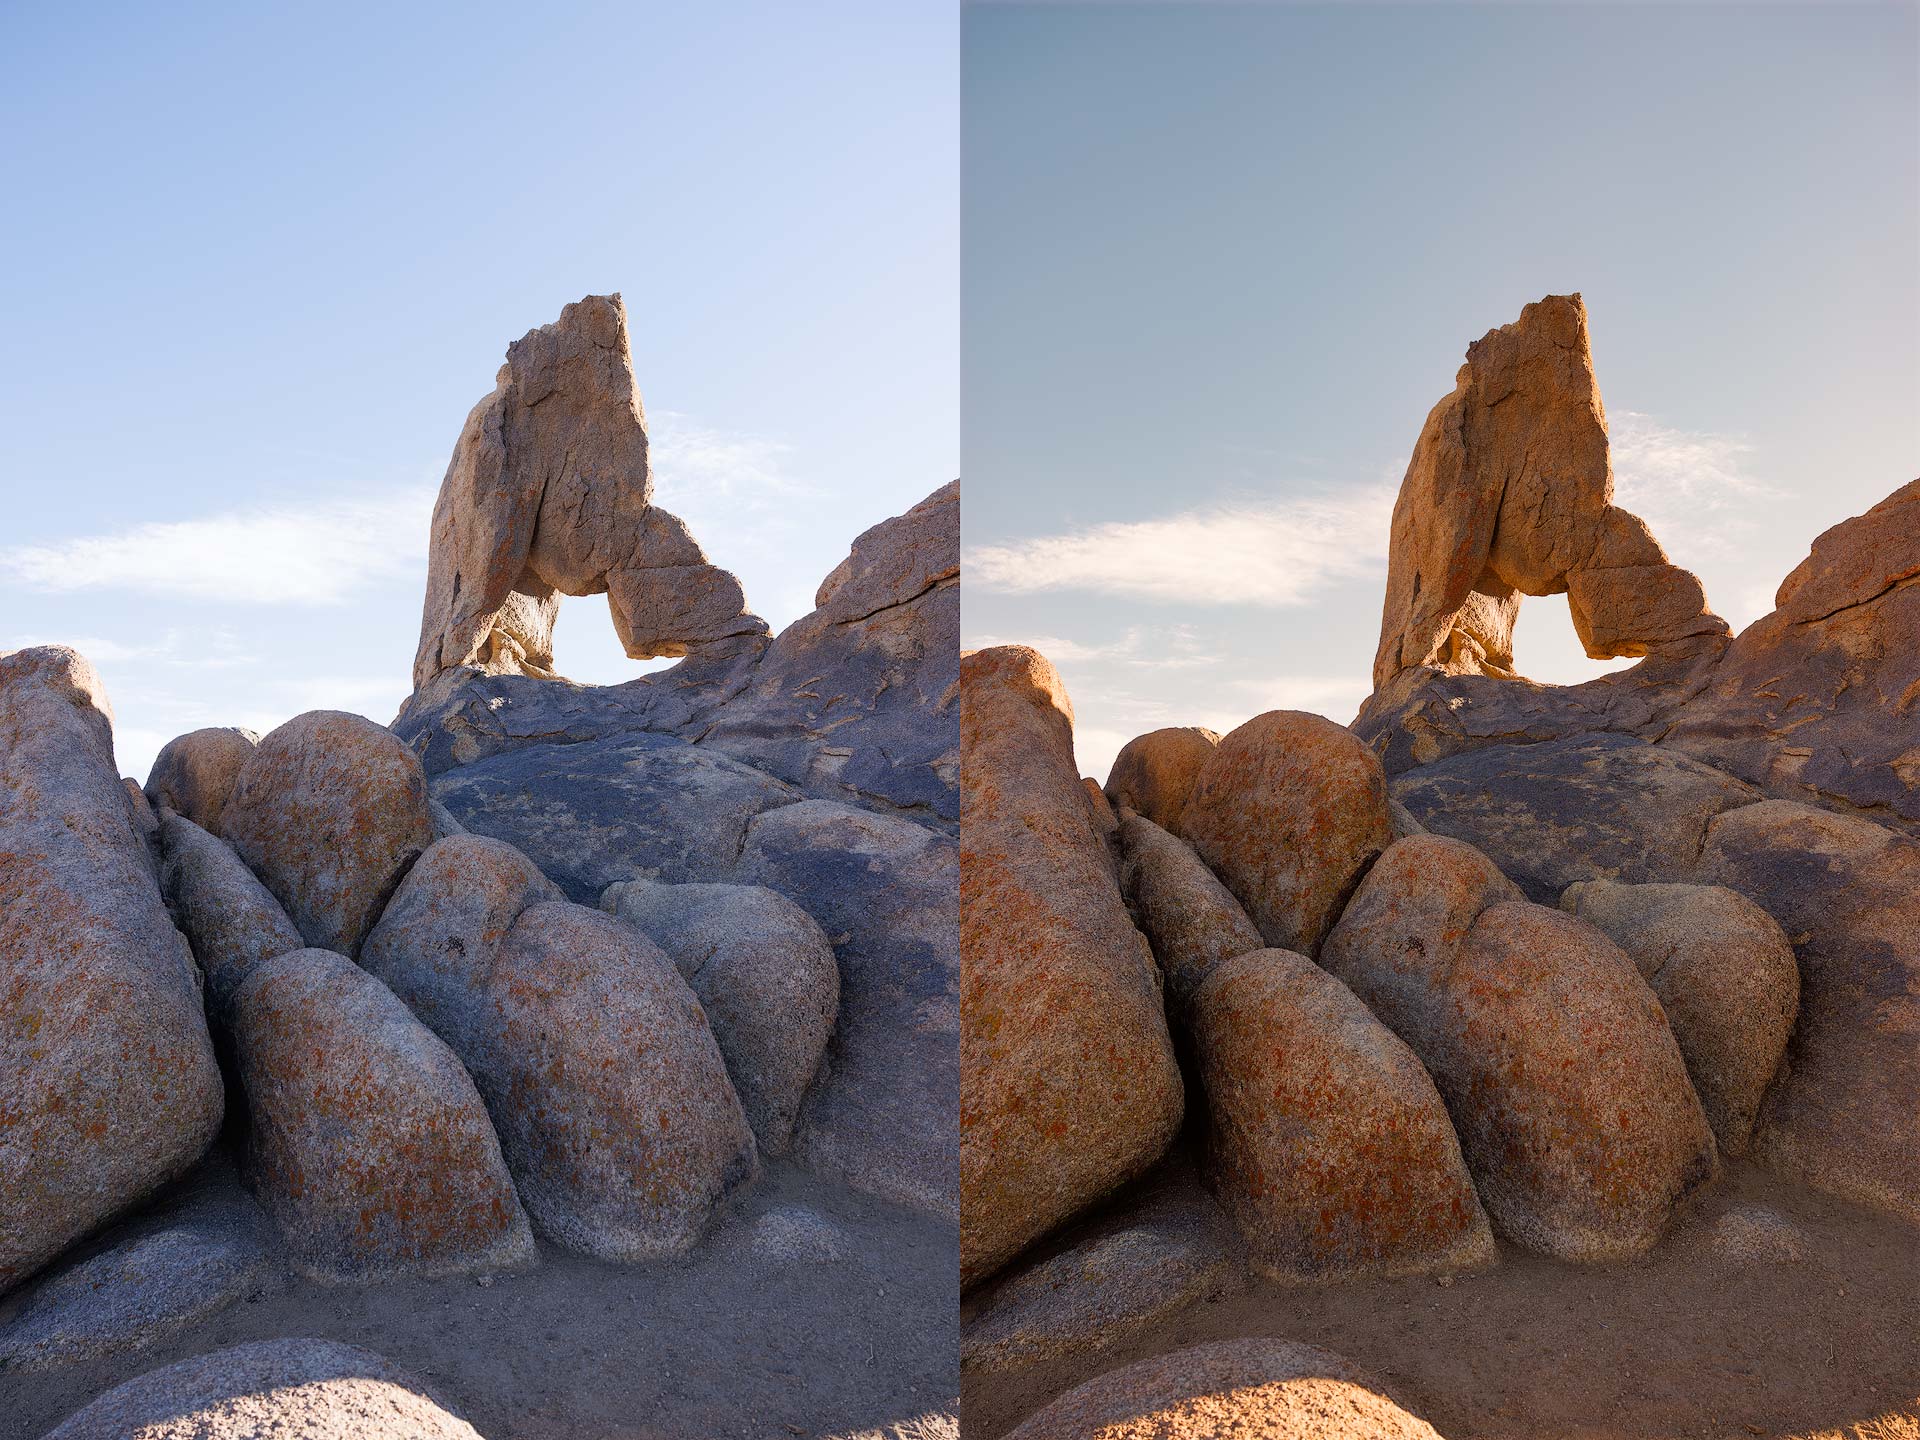 Before and after using Adjust Lighting and Balance Color in Topaz Photo AI V2